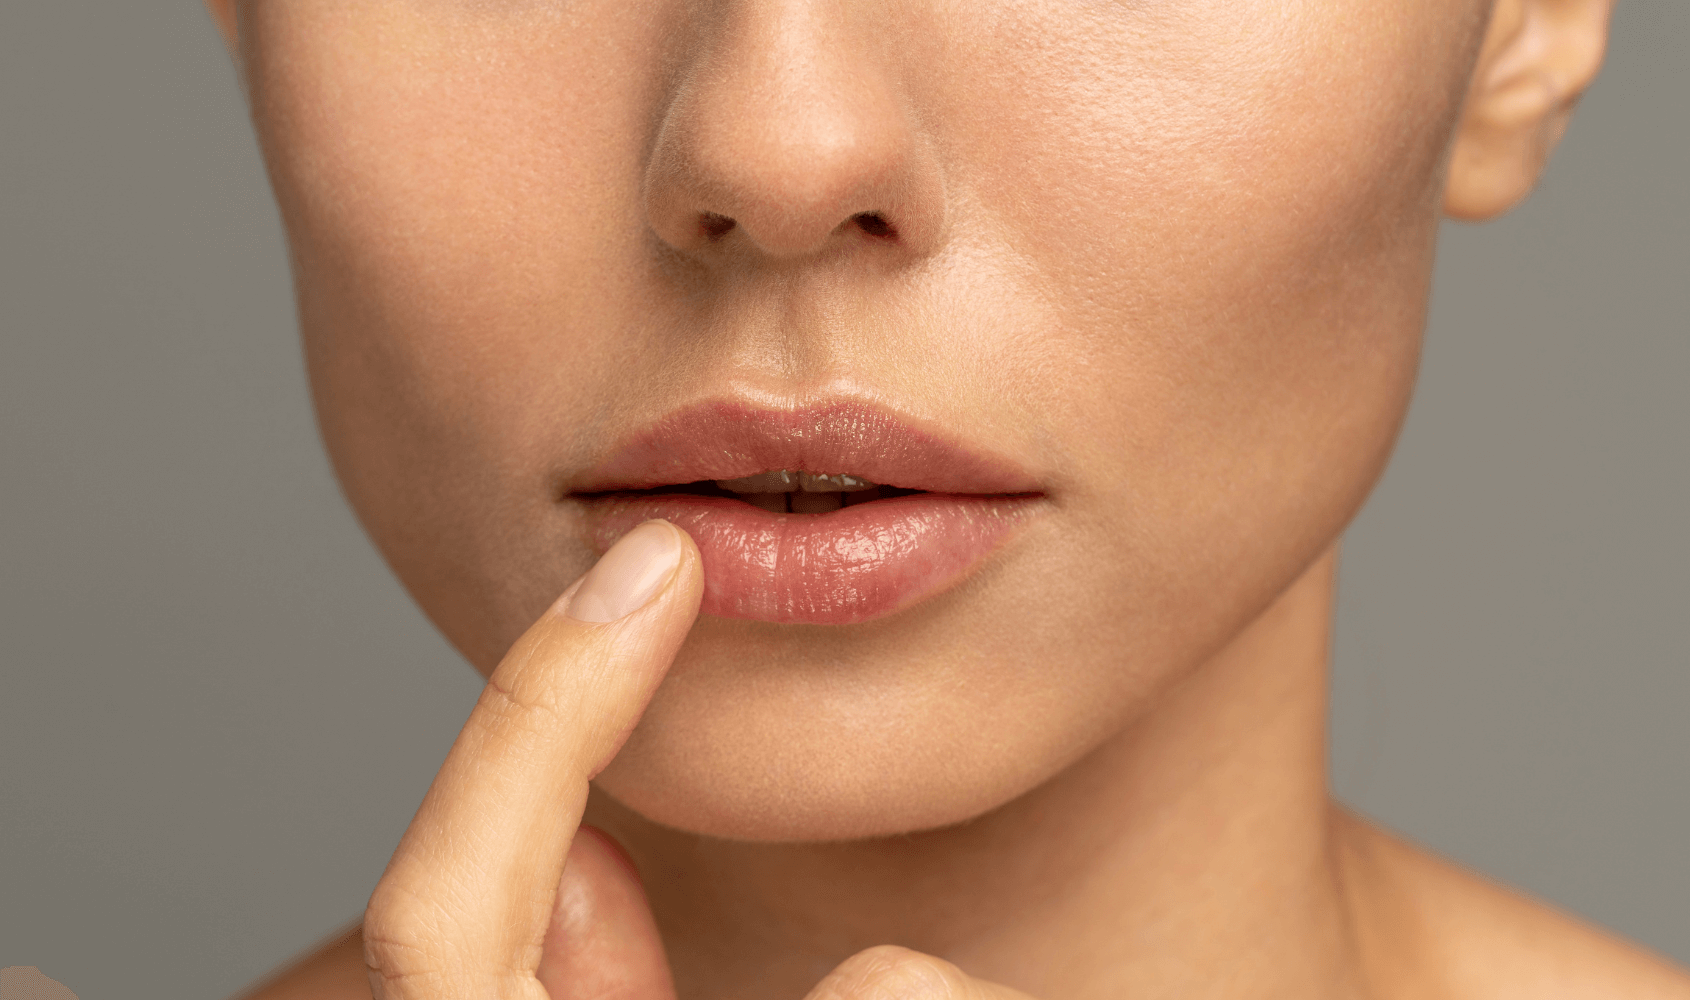 woman with lip fillers in Cardiff aesthetics clinic touching lips